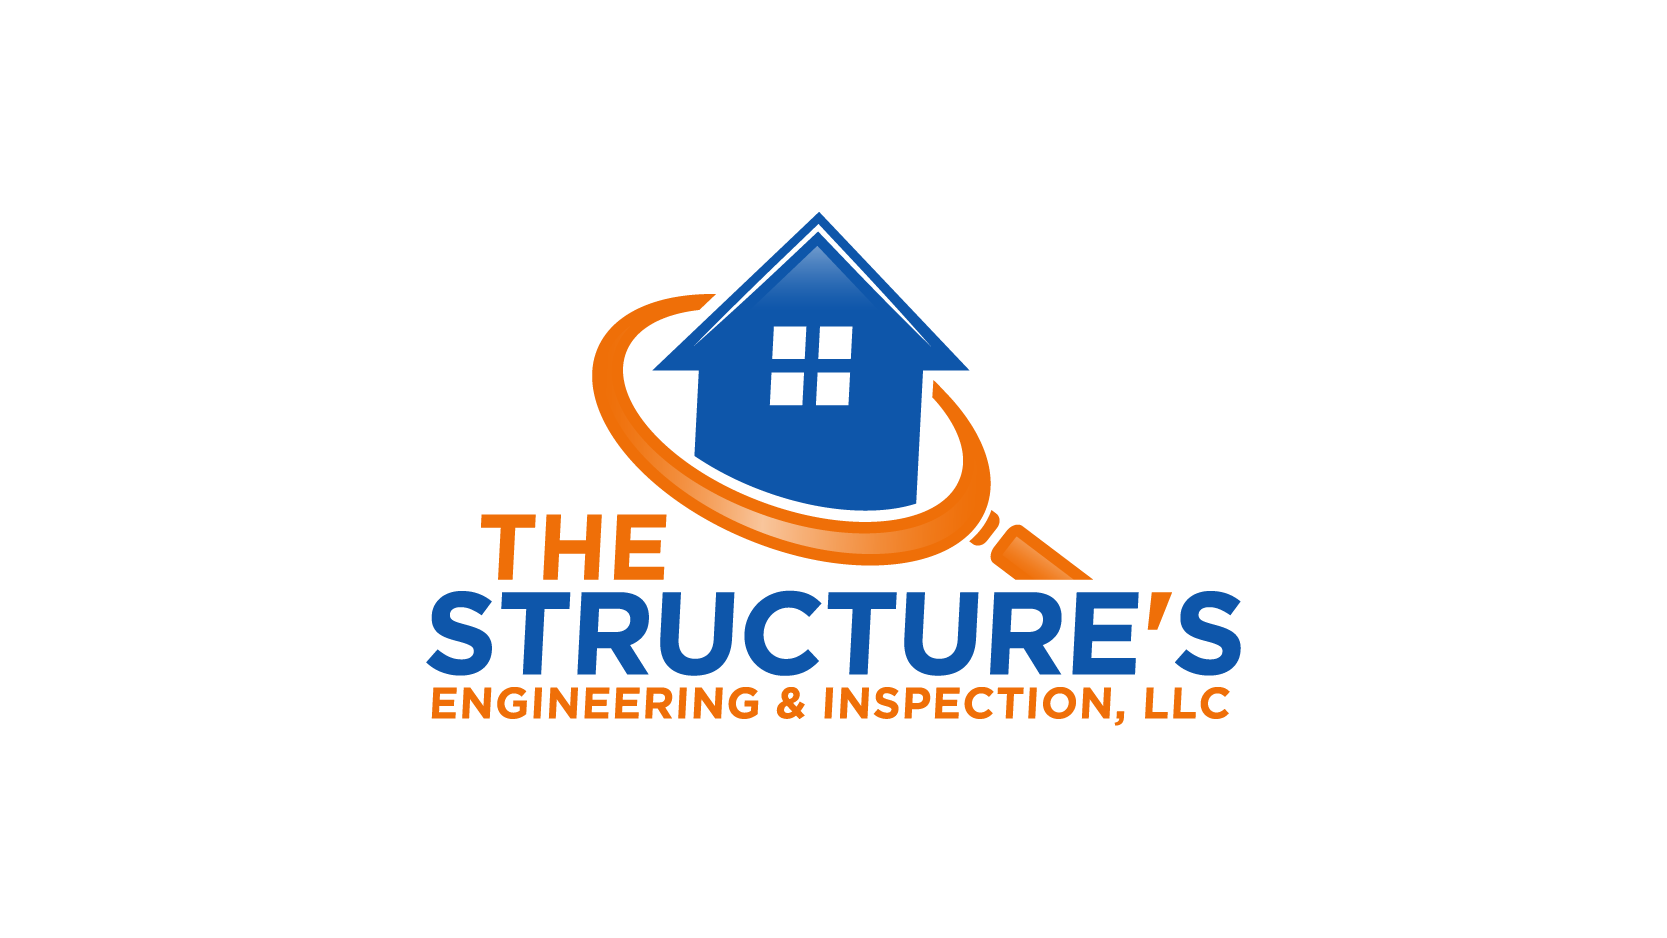 The Structure's Engineering & Inspection Logo